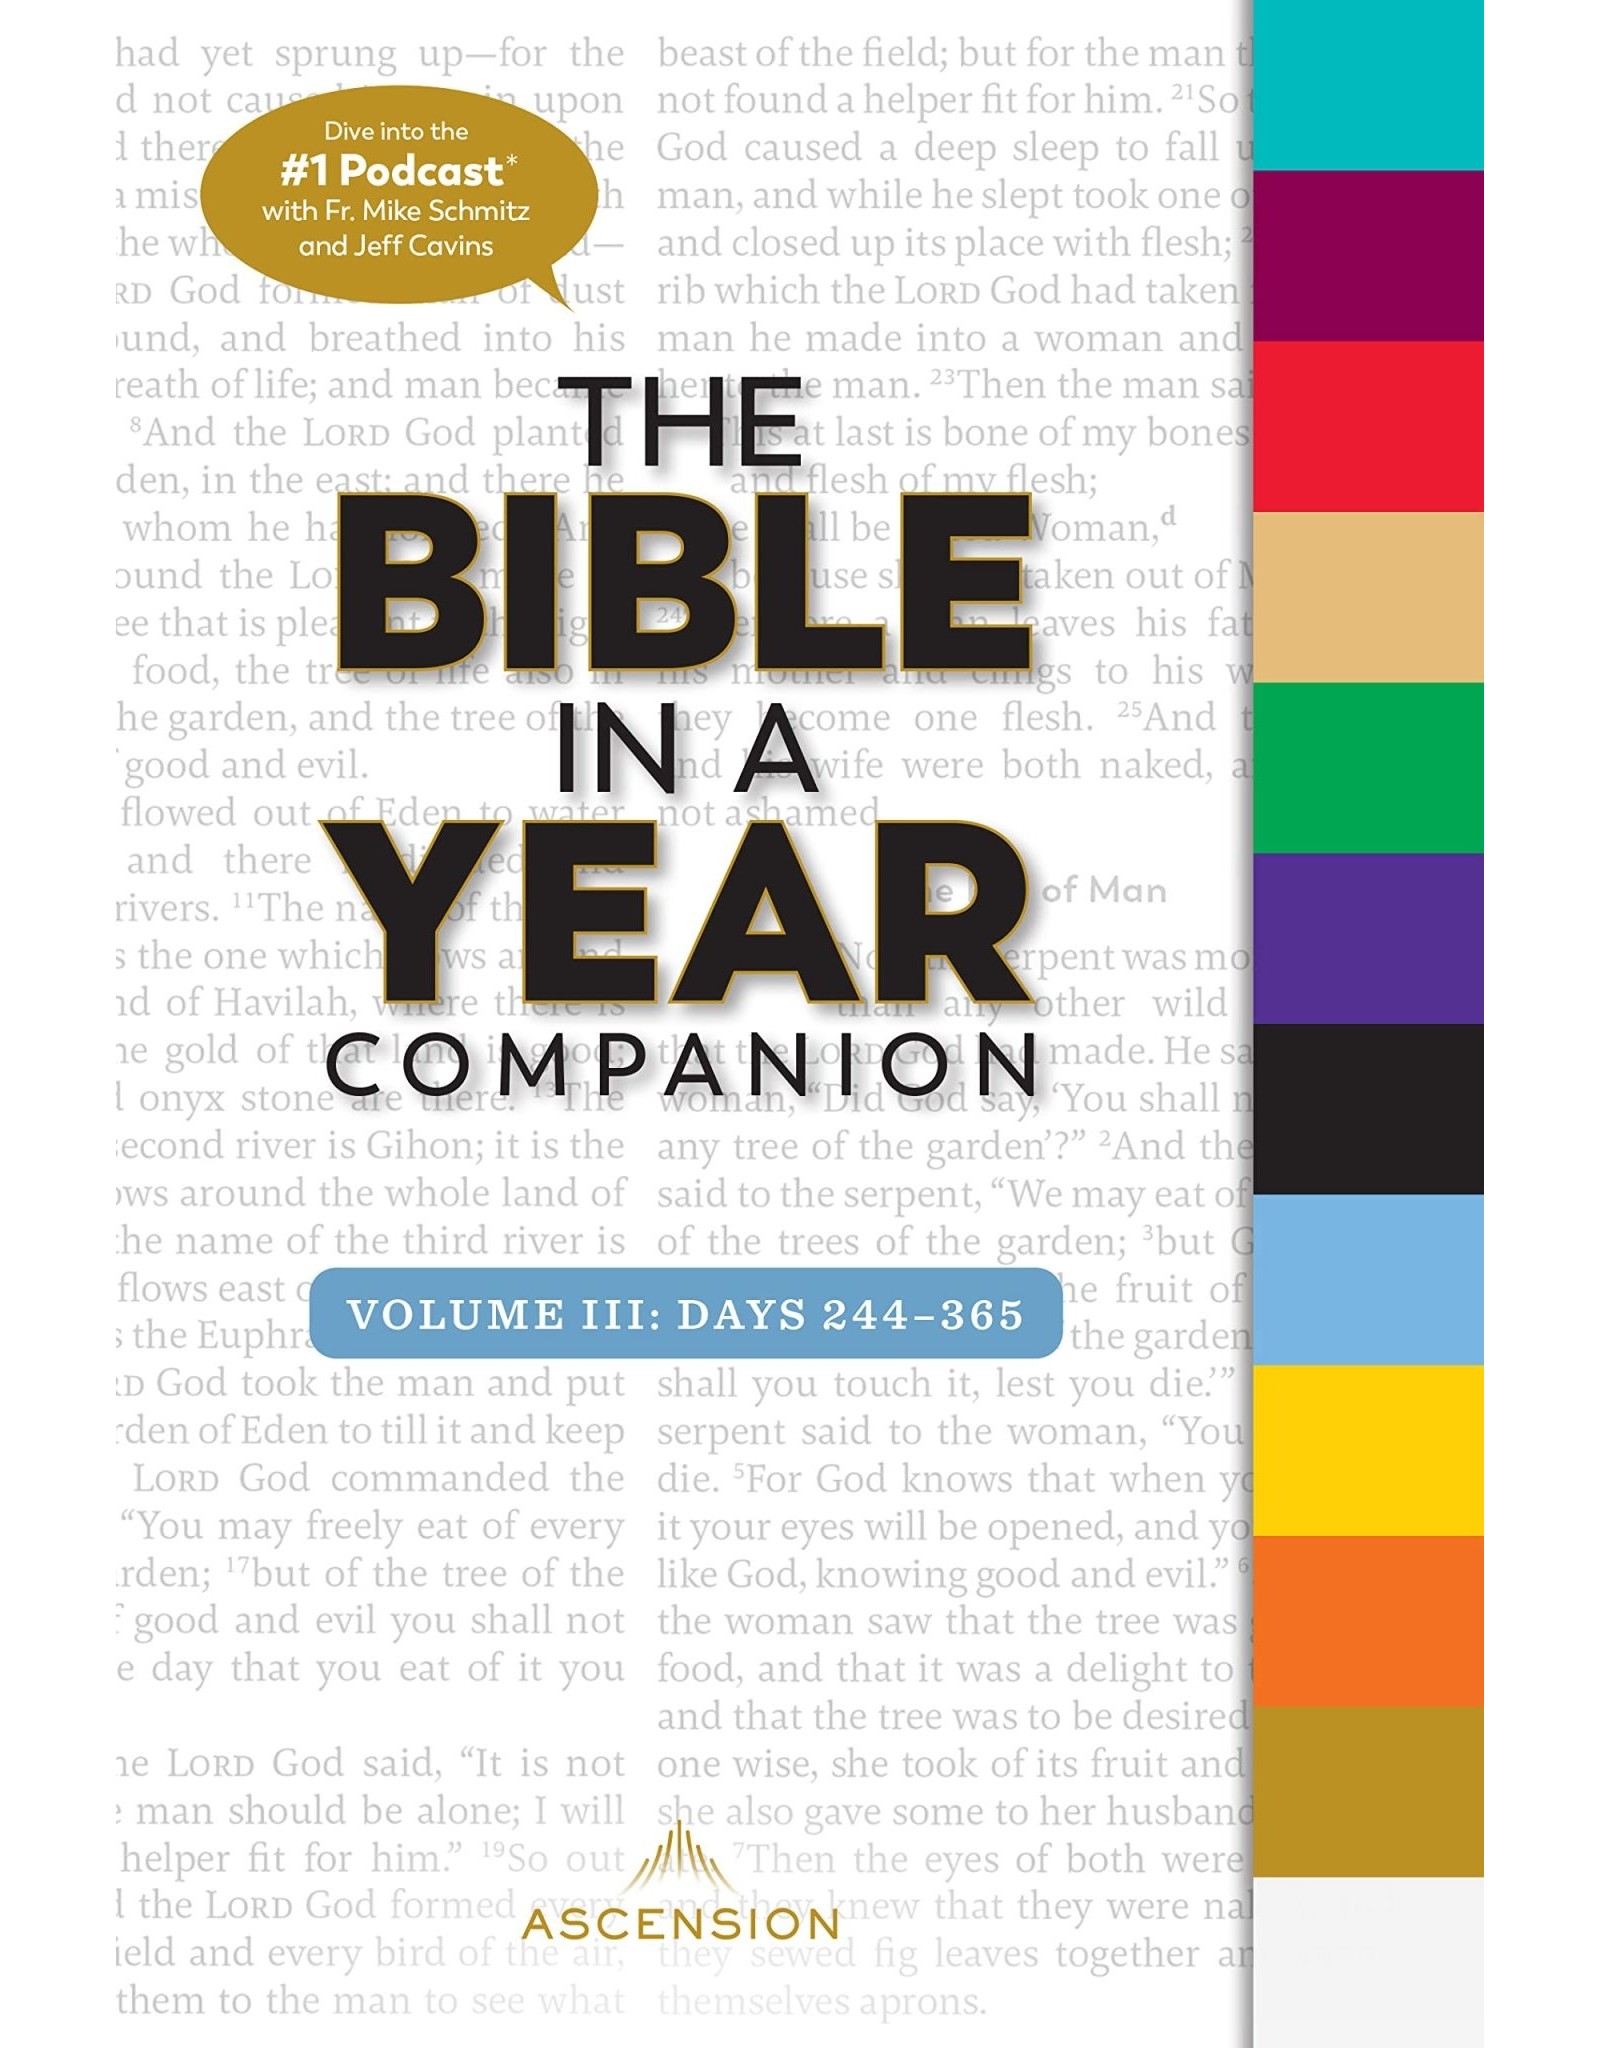 Ascension Press Bible in a Year Companion, Volume III